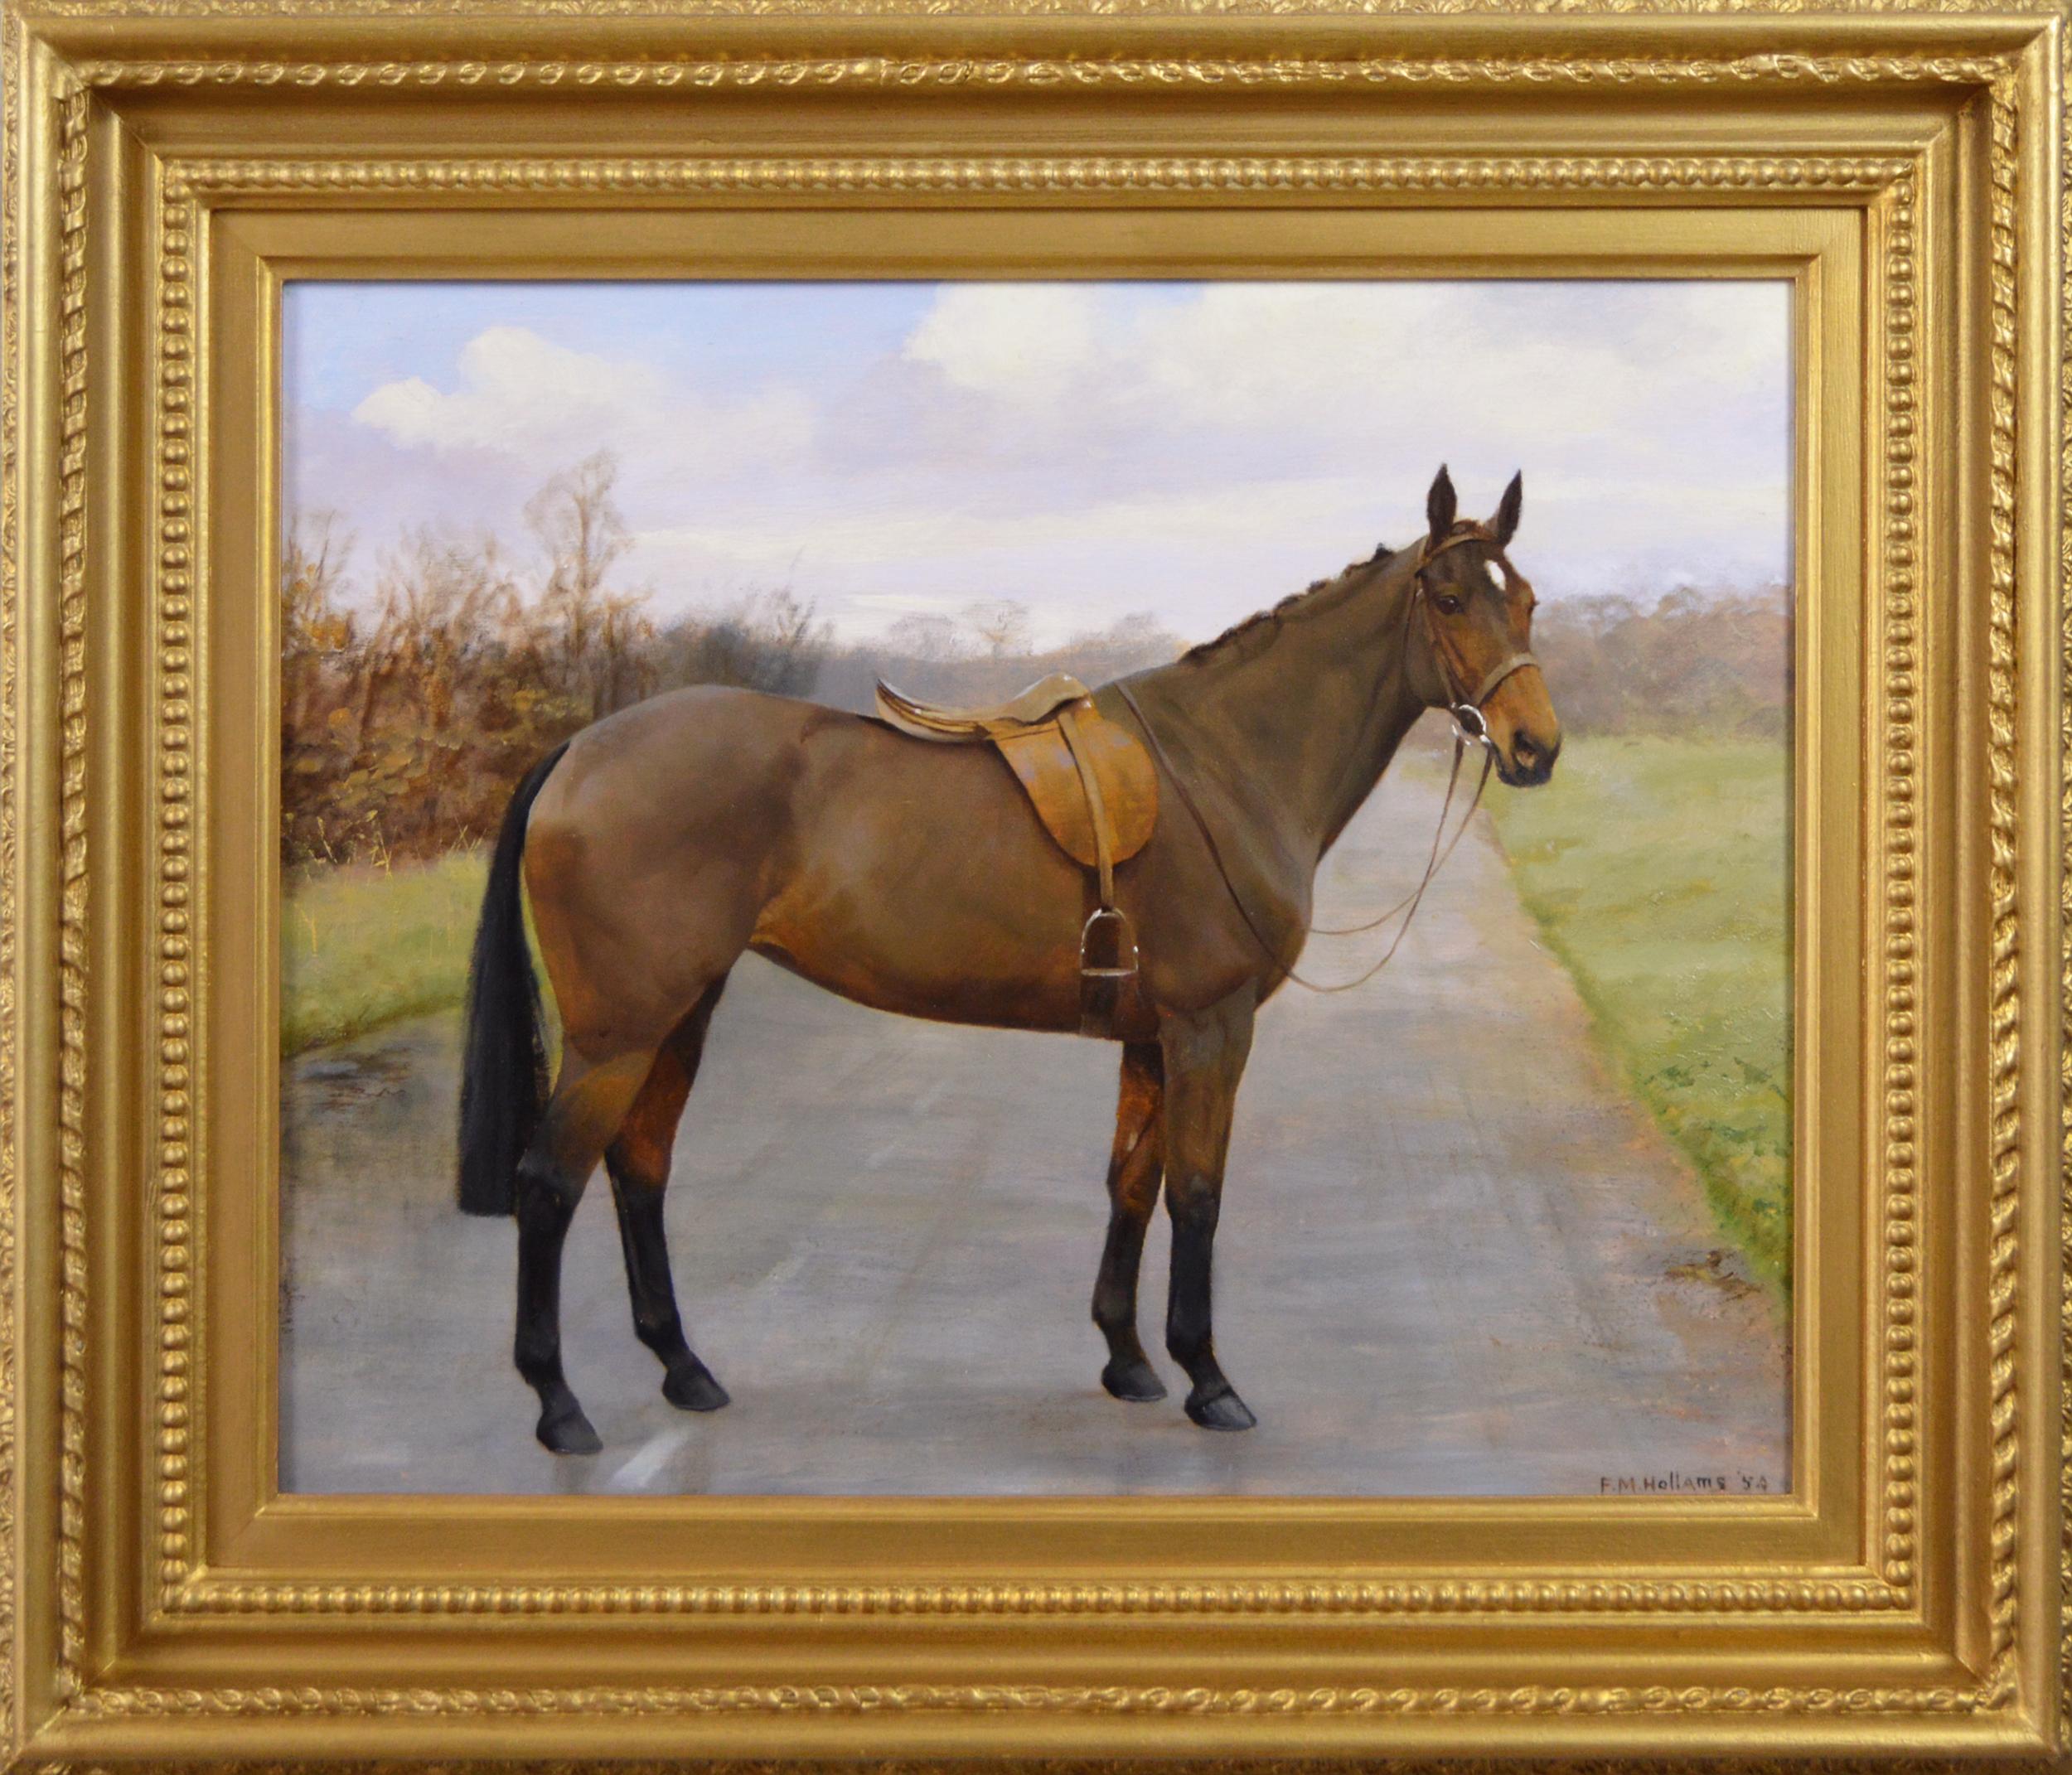 Florence Mabel Hollams Animal Painting - Horse portrait oil painting of a Bay hunter in a landscape